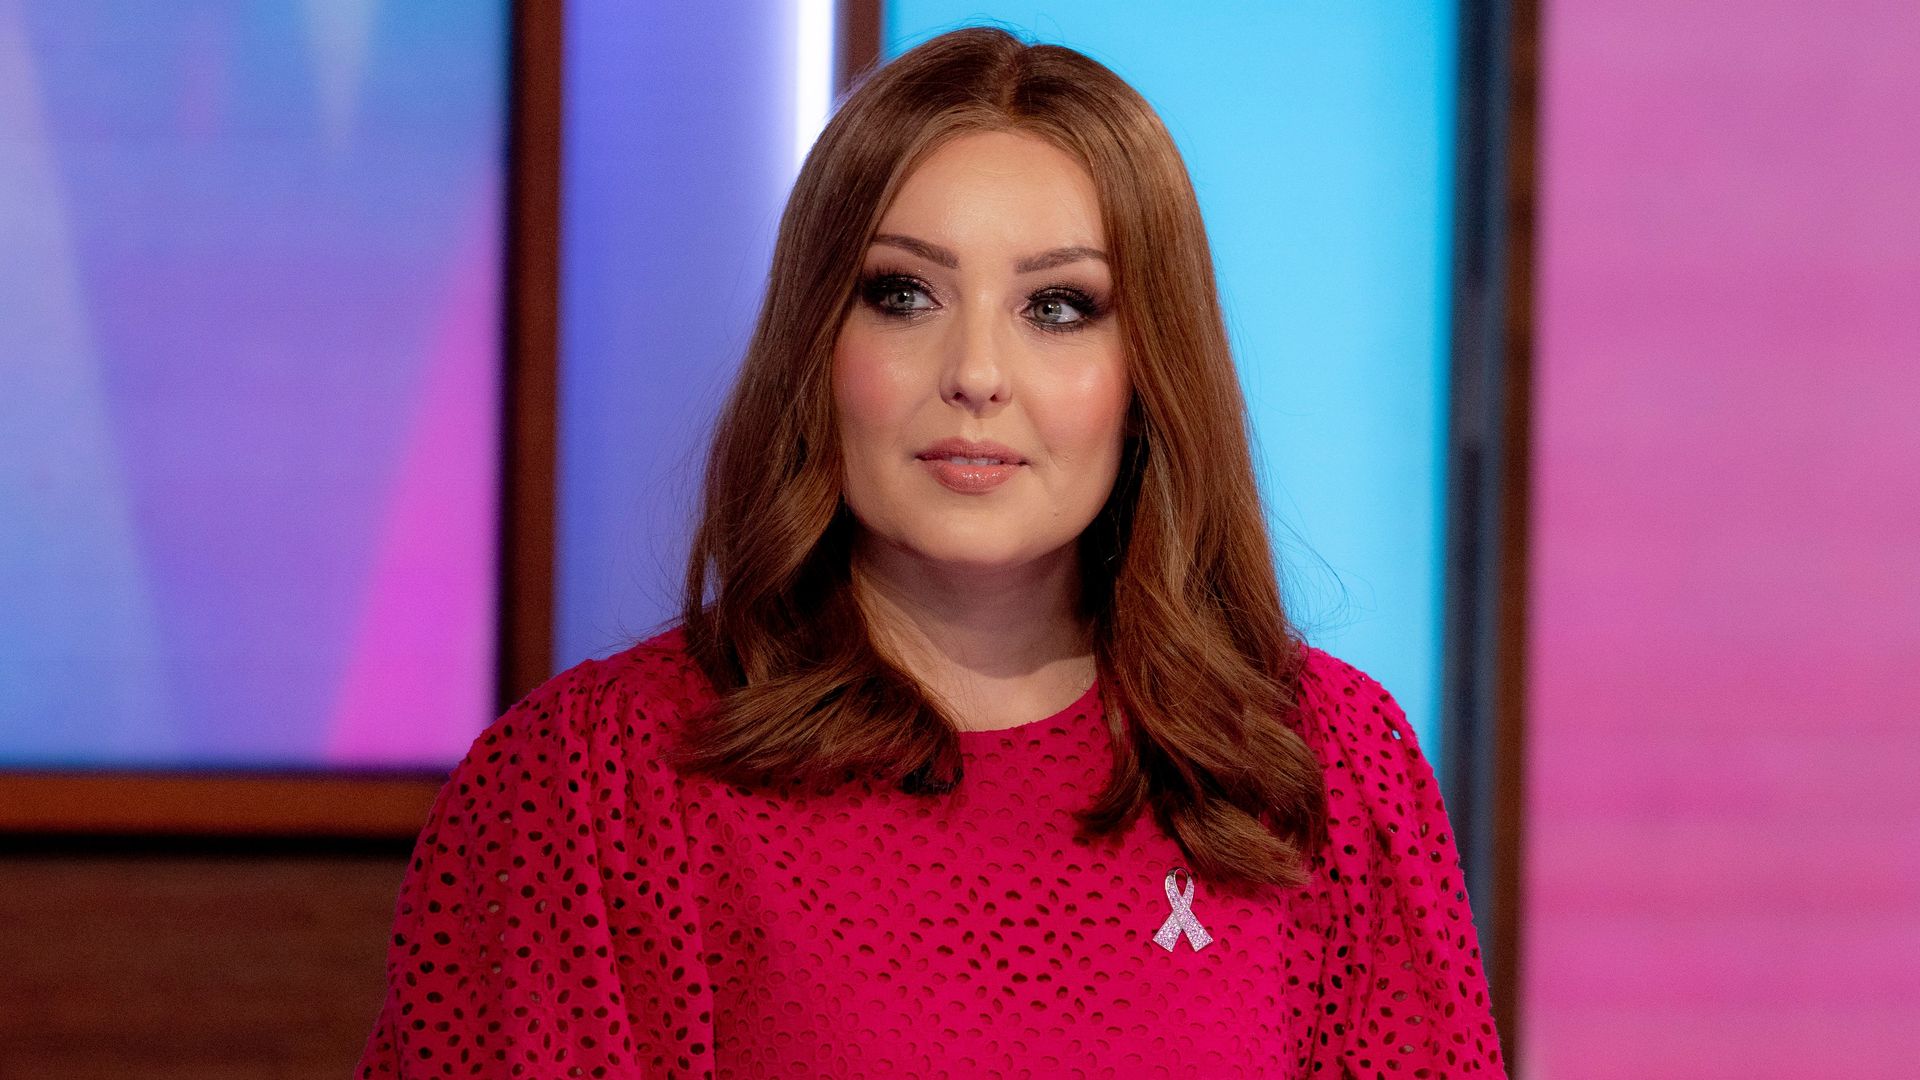 Amy Dowden in red dress on set of Loose Women